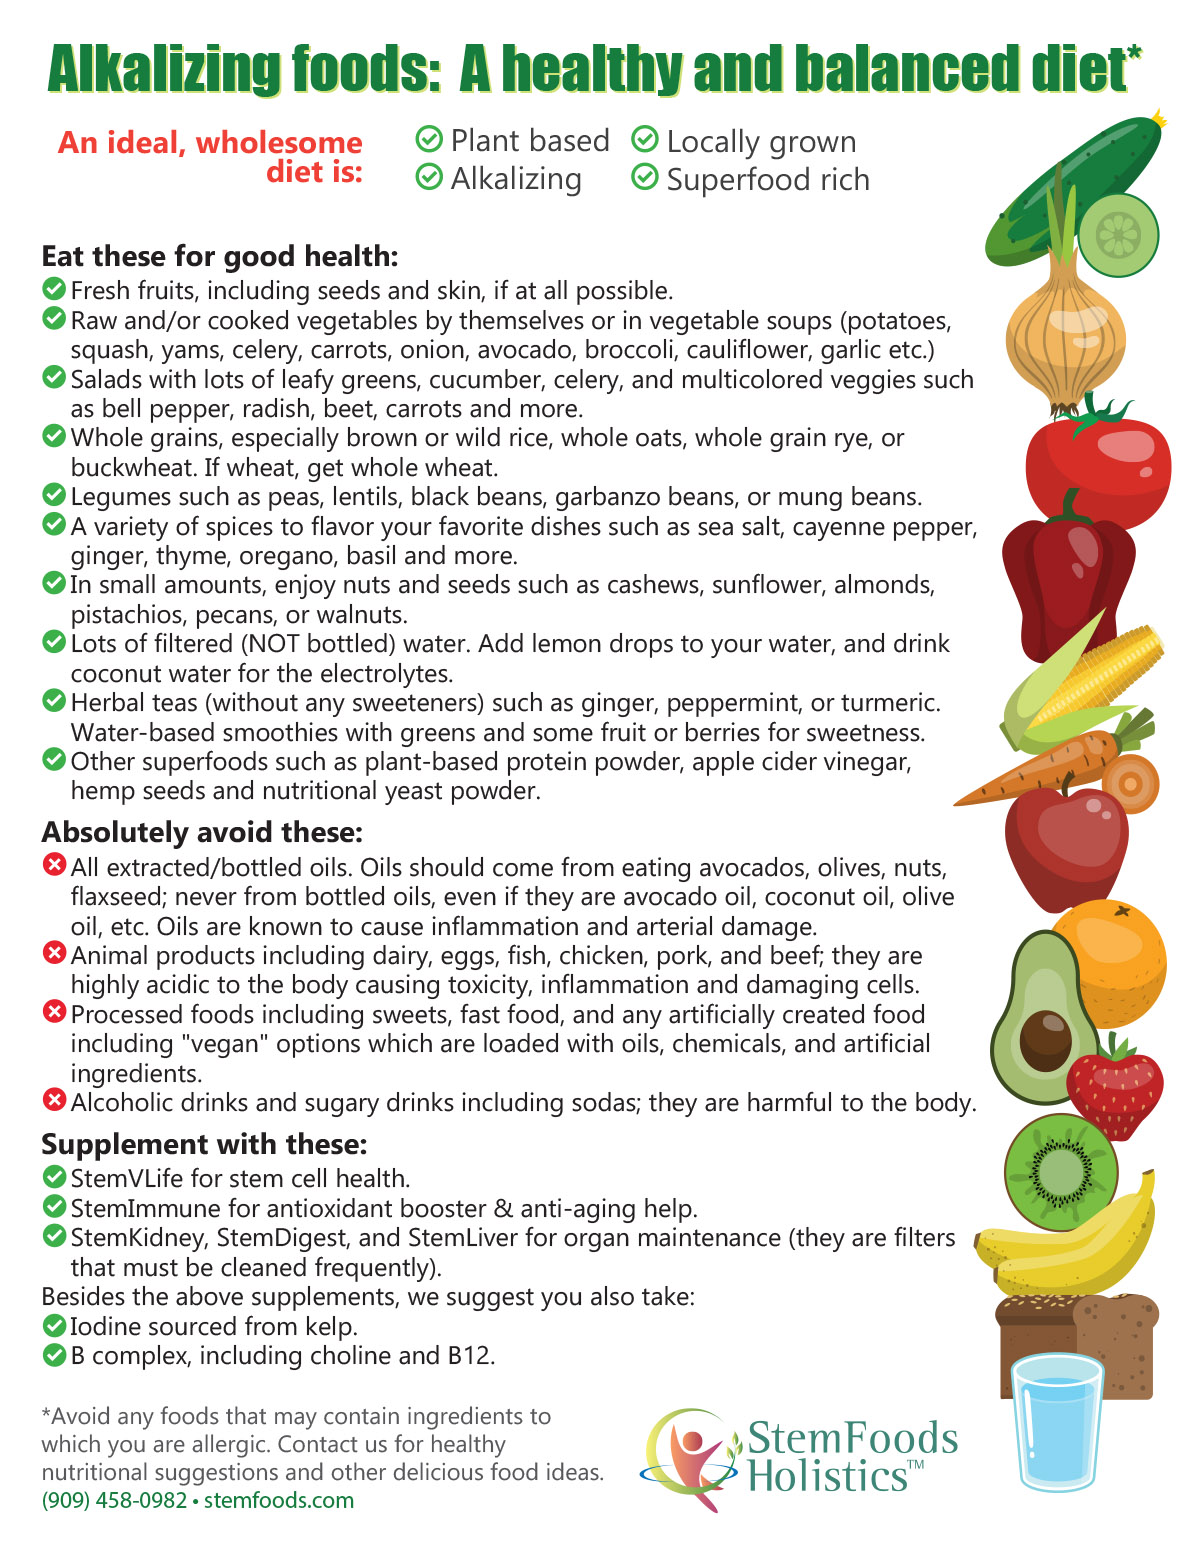 Alkalizing Foods:  A Heathy and Balanced Diet*